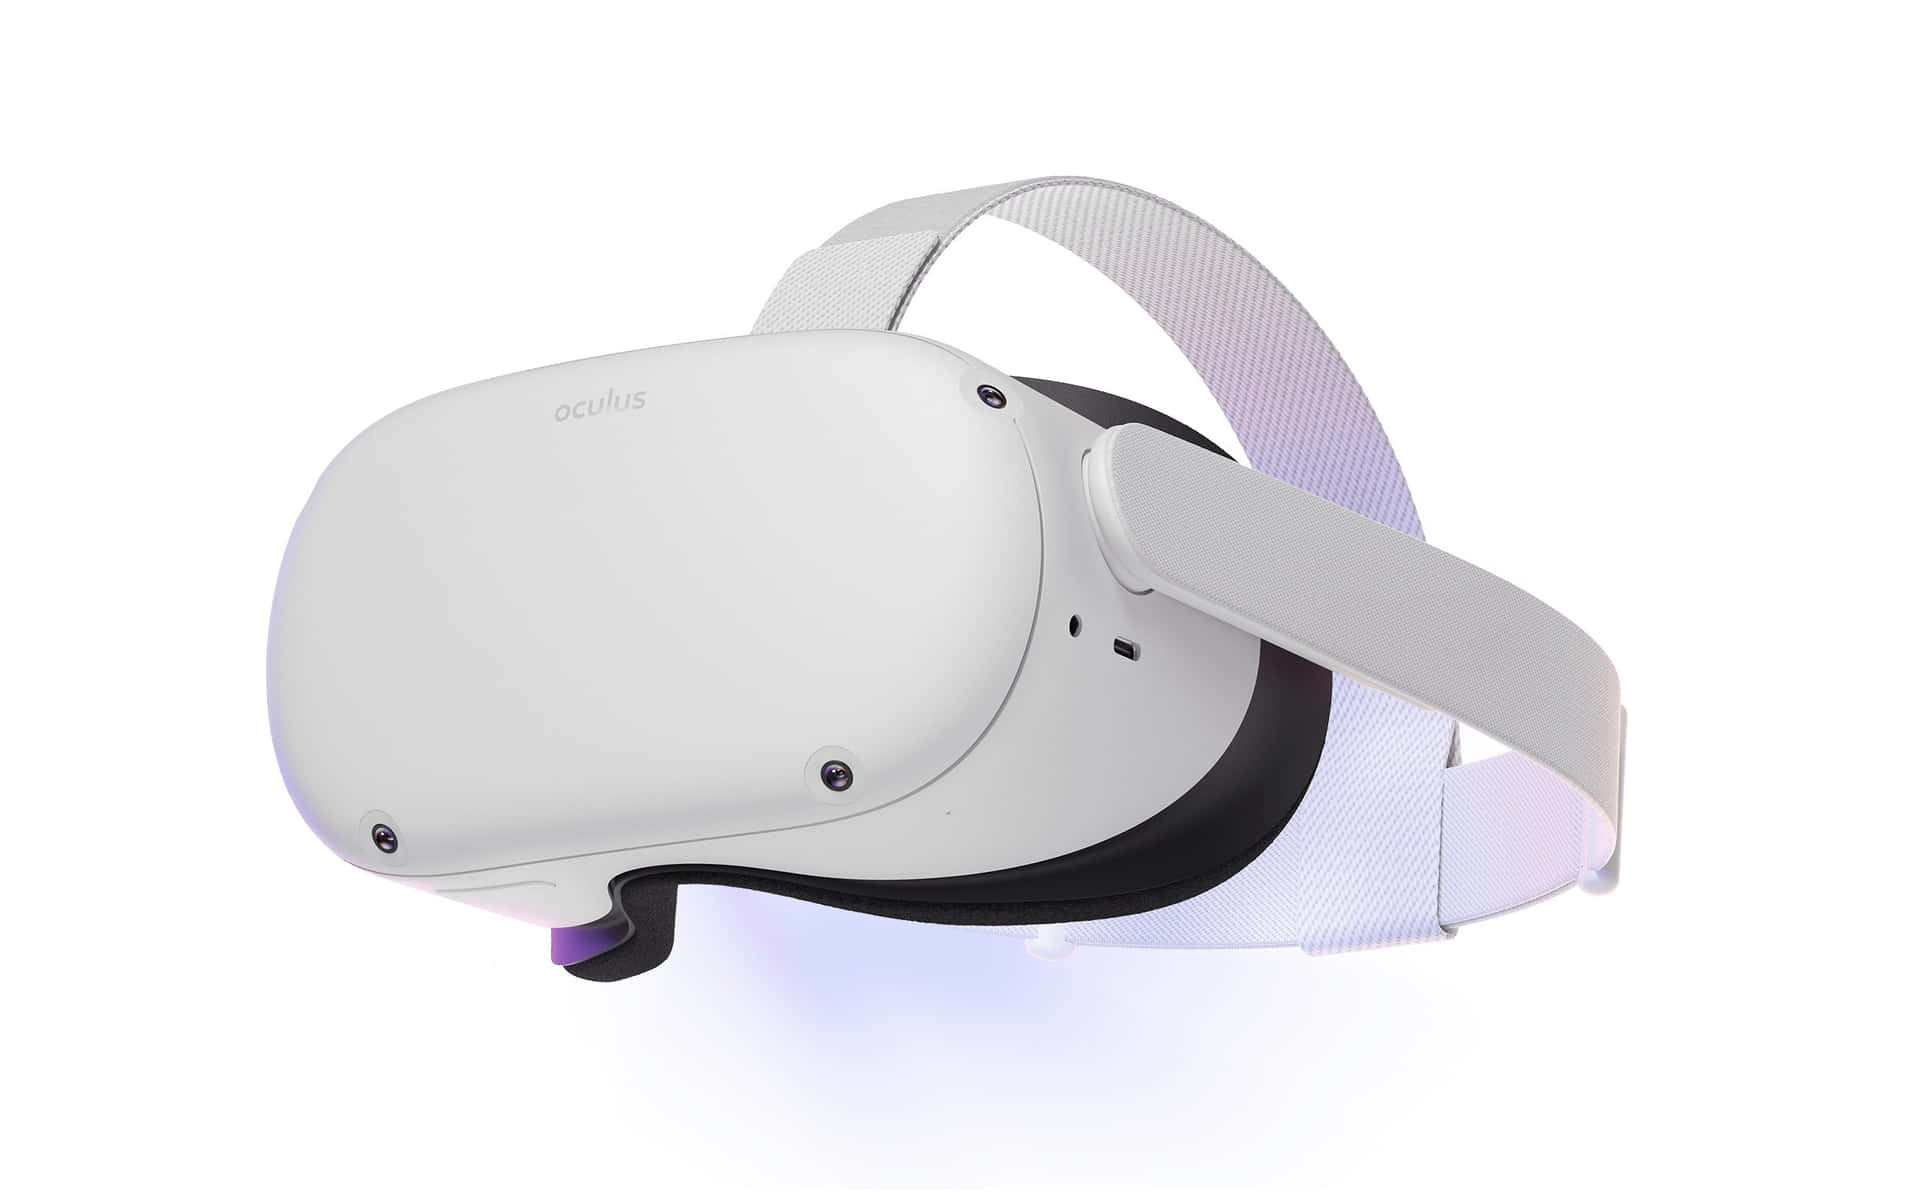 A White Vr Headset With Purple Lights